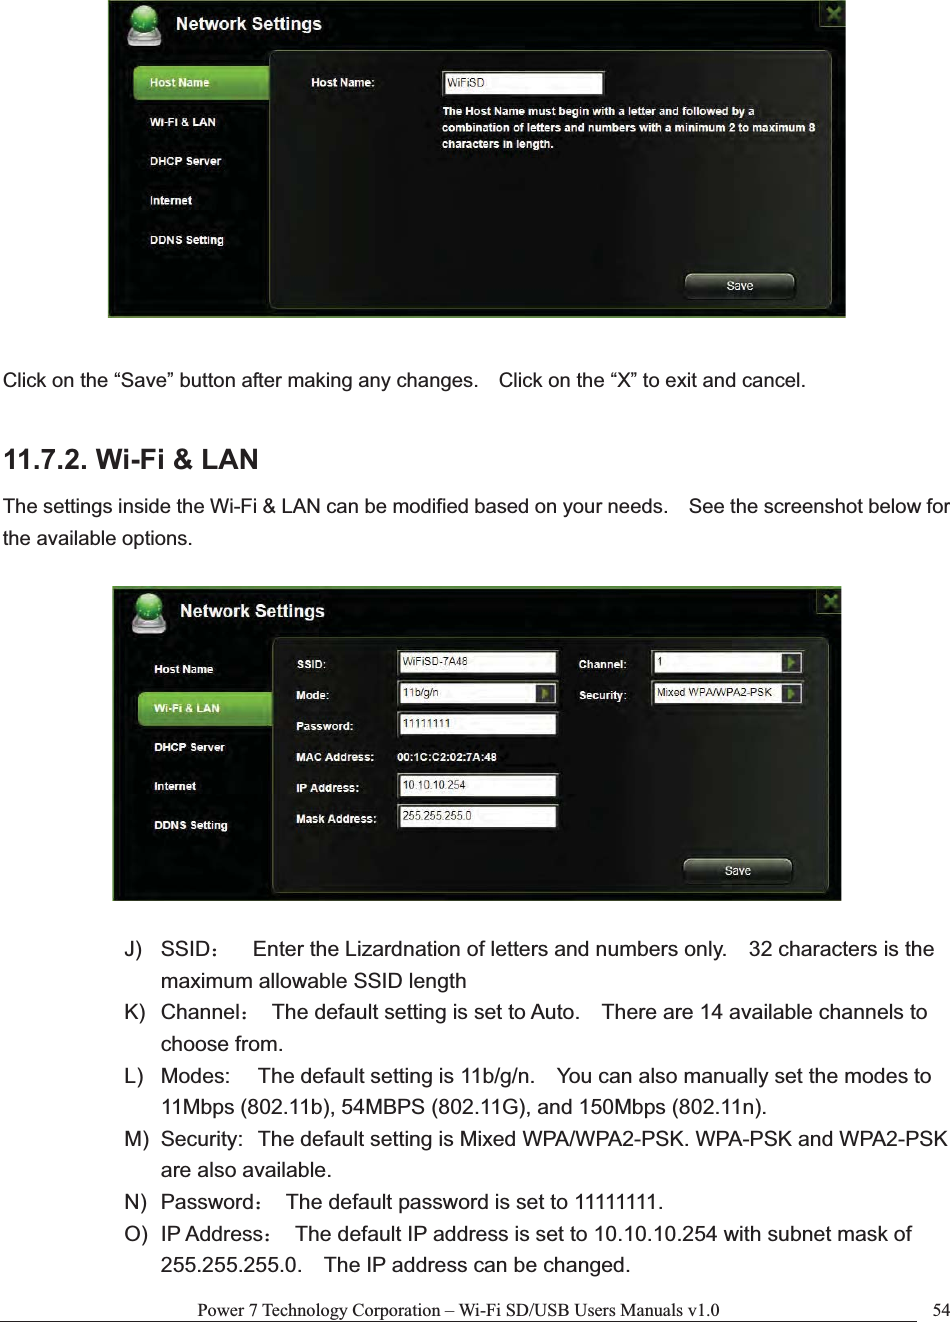 Power 7 Technology Corporation – Wi-Fi SD/USB Users Manuals v1.0  54Click on the “Save” button after making any changes.    Click on the “X” to exit and cancel. 11.7.2. Wi-Fi &amp; LAN The settings inside the Wi-Fi &amp; LAN can be modified based on your needs.    See the screenshot below for the available options. J) SSID˖    Enter the Lizardnation of letters and numbers only.    32 characters is the maximum allowable SSID length   K) Channel˖  The default setting is set to Auto.    There are 14 available channels to choose from. L)  Modes:  The default setting is 11b/g/n.    You can also manually set the modes to 11Mbps (802.11b), 54MBPS (802.11G), and 150Mbps (802.11n). M)  Security:  The default setting is Mixed WPA/WPA2-PSK. WPA-PSK and WPA2-PSK are also available. N) Password˖  The default password is set to 11111111. O) IP Address˖  The default IP address is set to 10.10.10.254 with subnet mask of 255.255.255.0.    The IP address can be changed. 